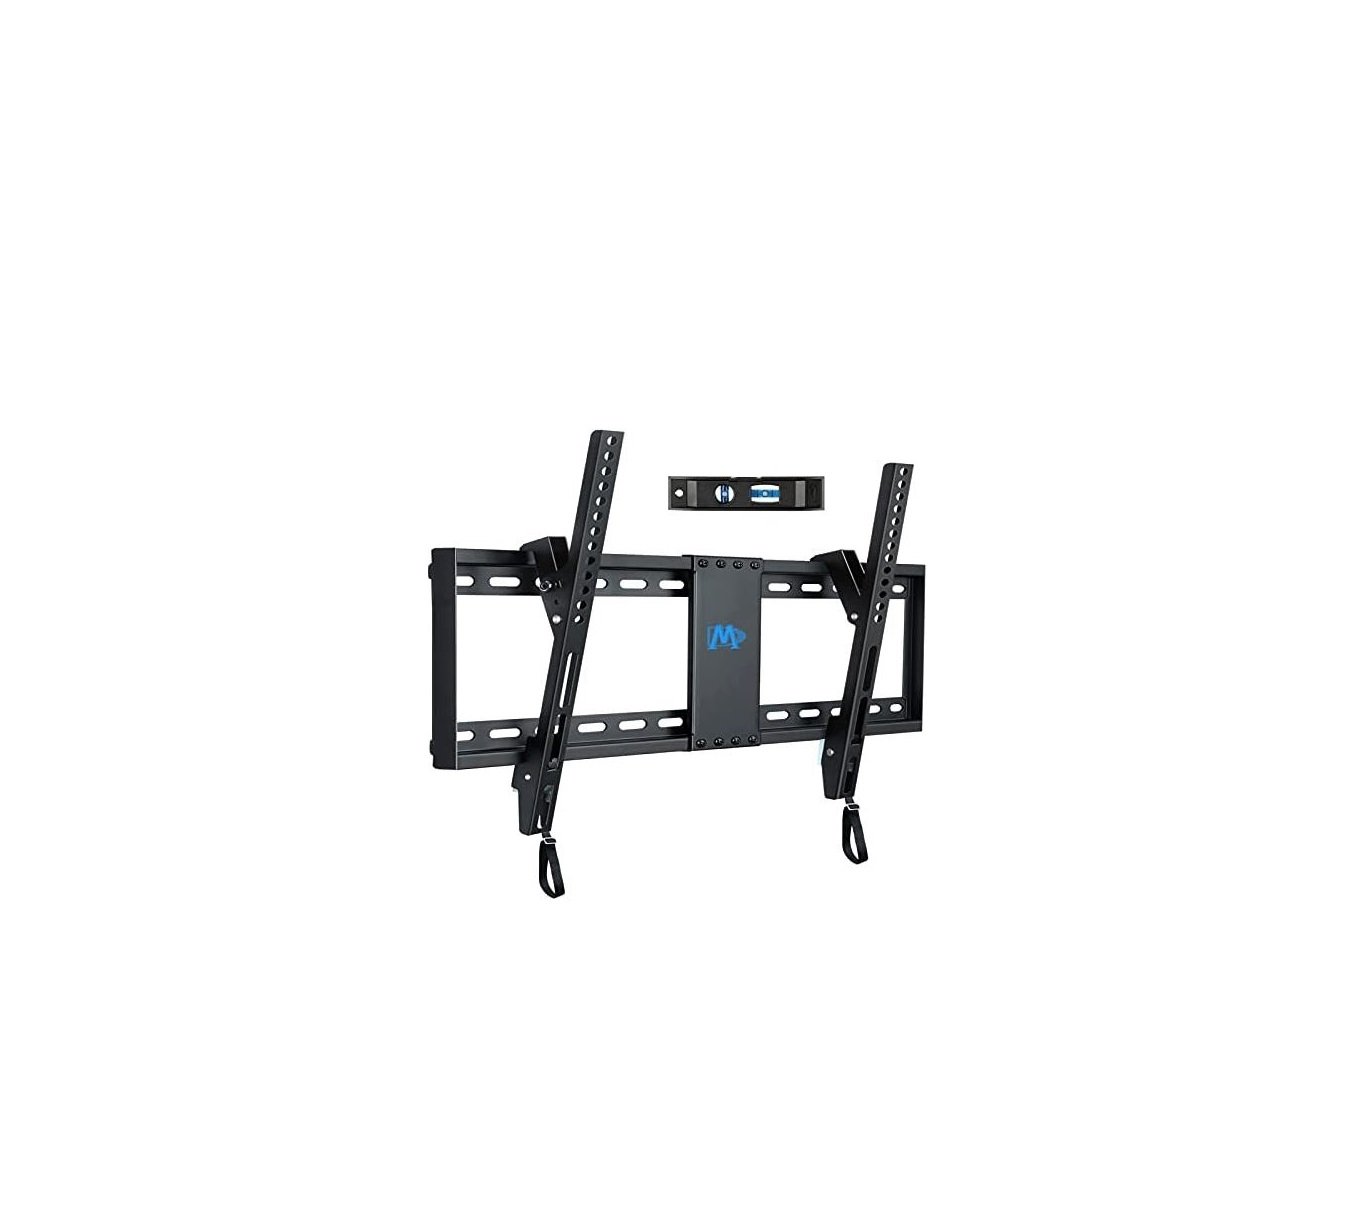 Mounting Dream MD2268-LK TV Mount for Most 37-70 Inch TV User Manual - fiture image